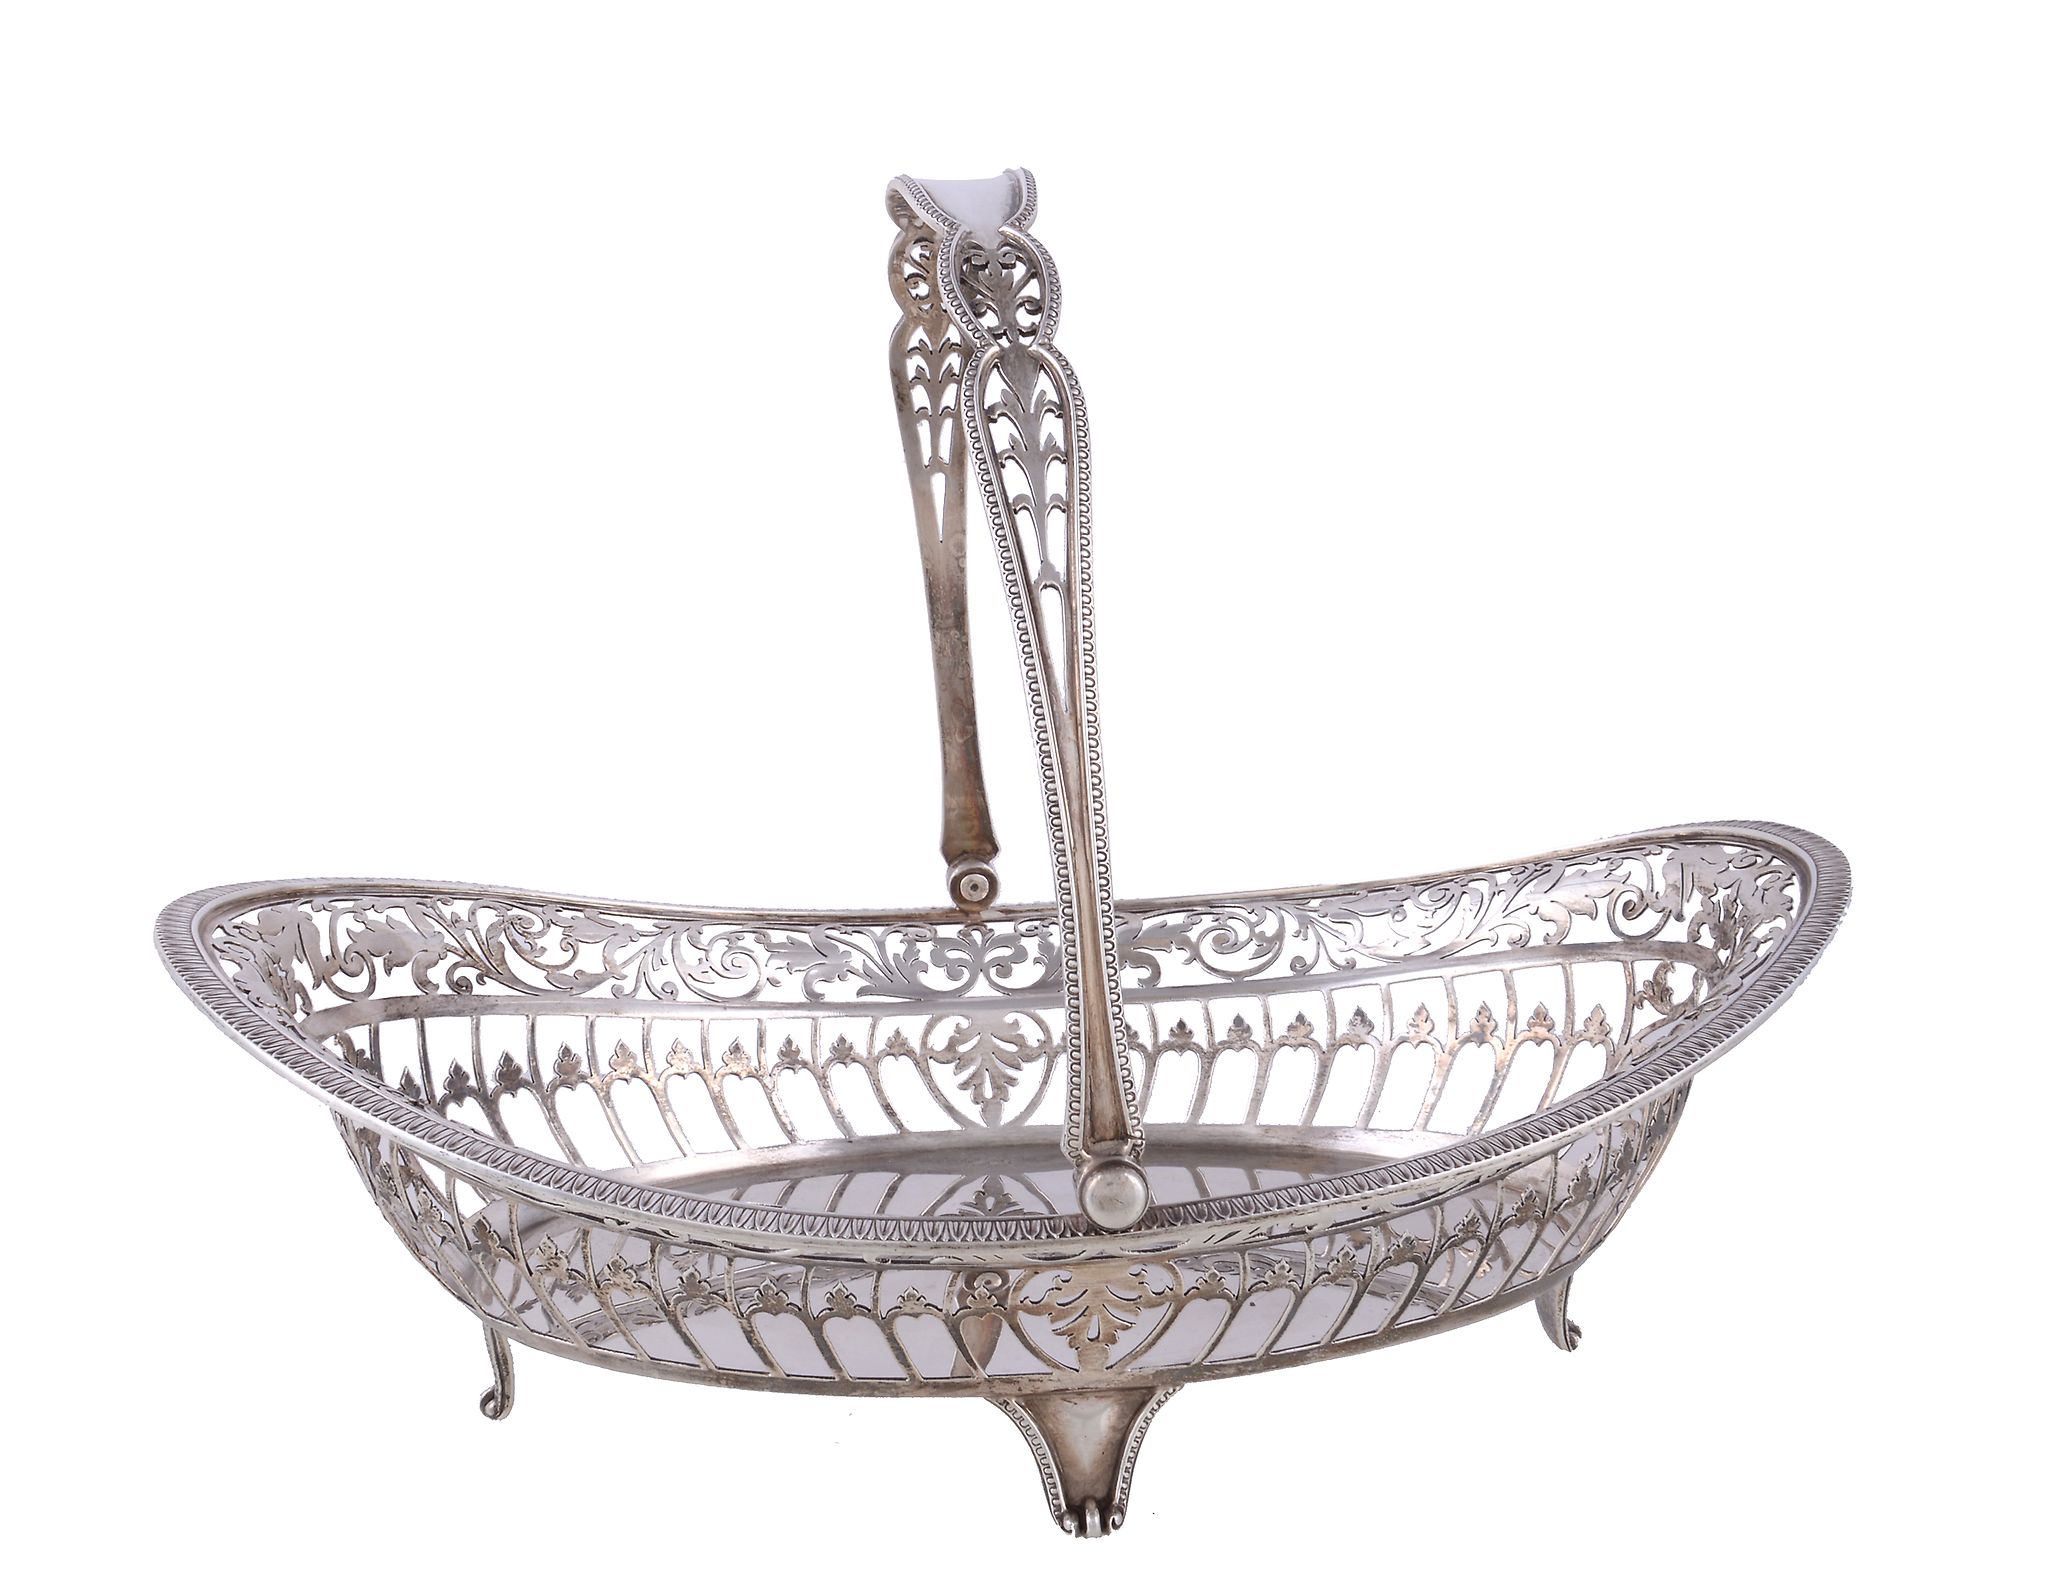 A silver oval basket by James Dixon & Sons Ltd, Sheffield 1927, with a bead edged part pierced